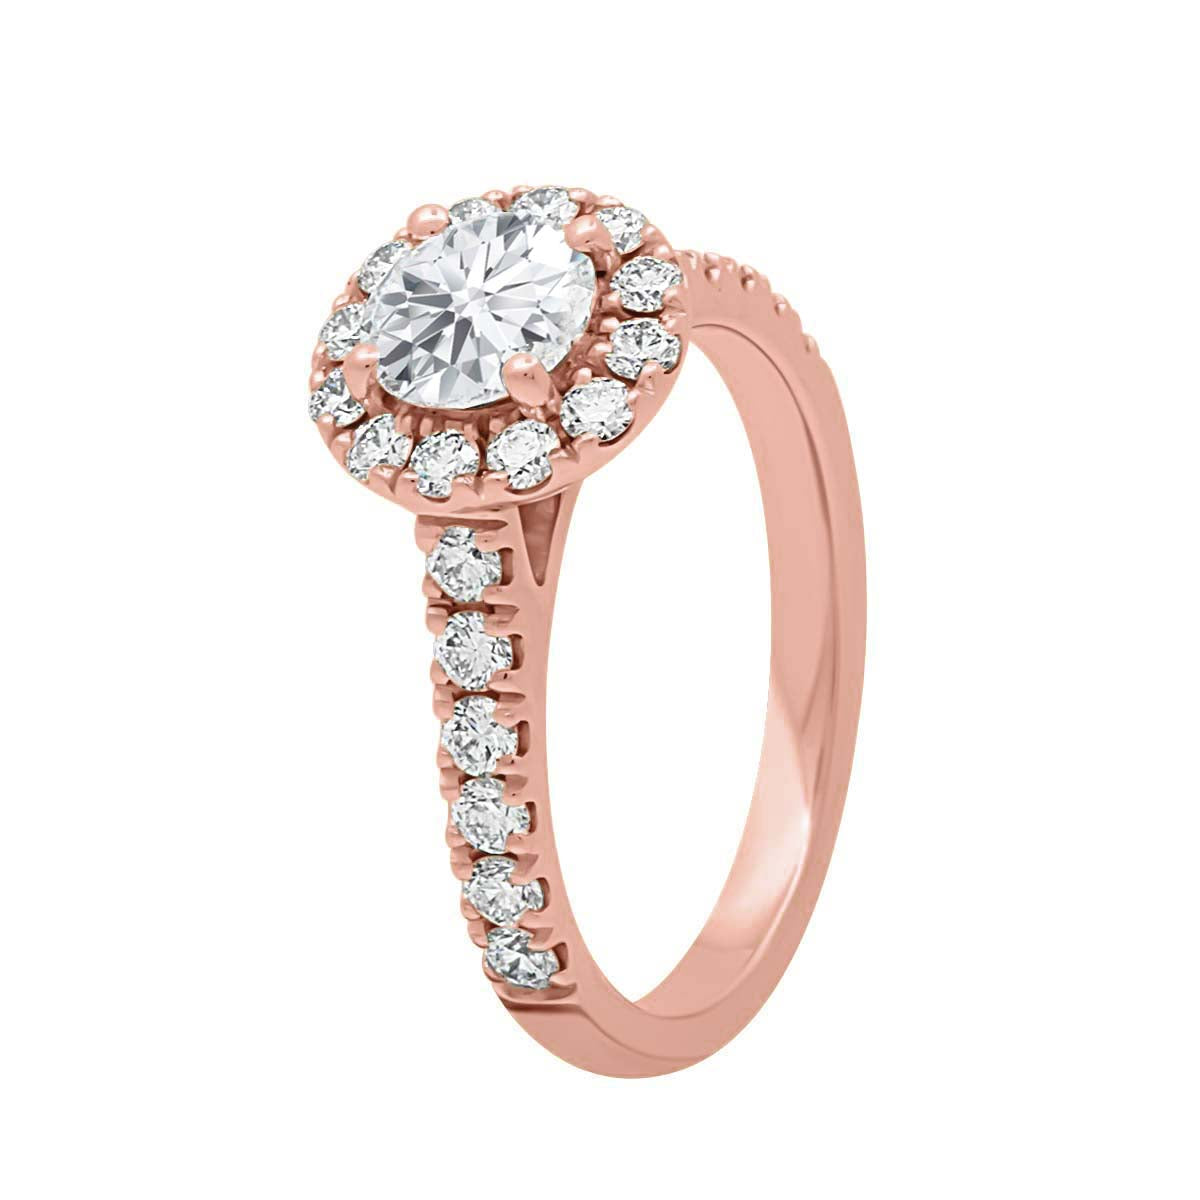 Halo Engagement Ring Diamond Band in rose gold  upright and angled diagonally 